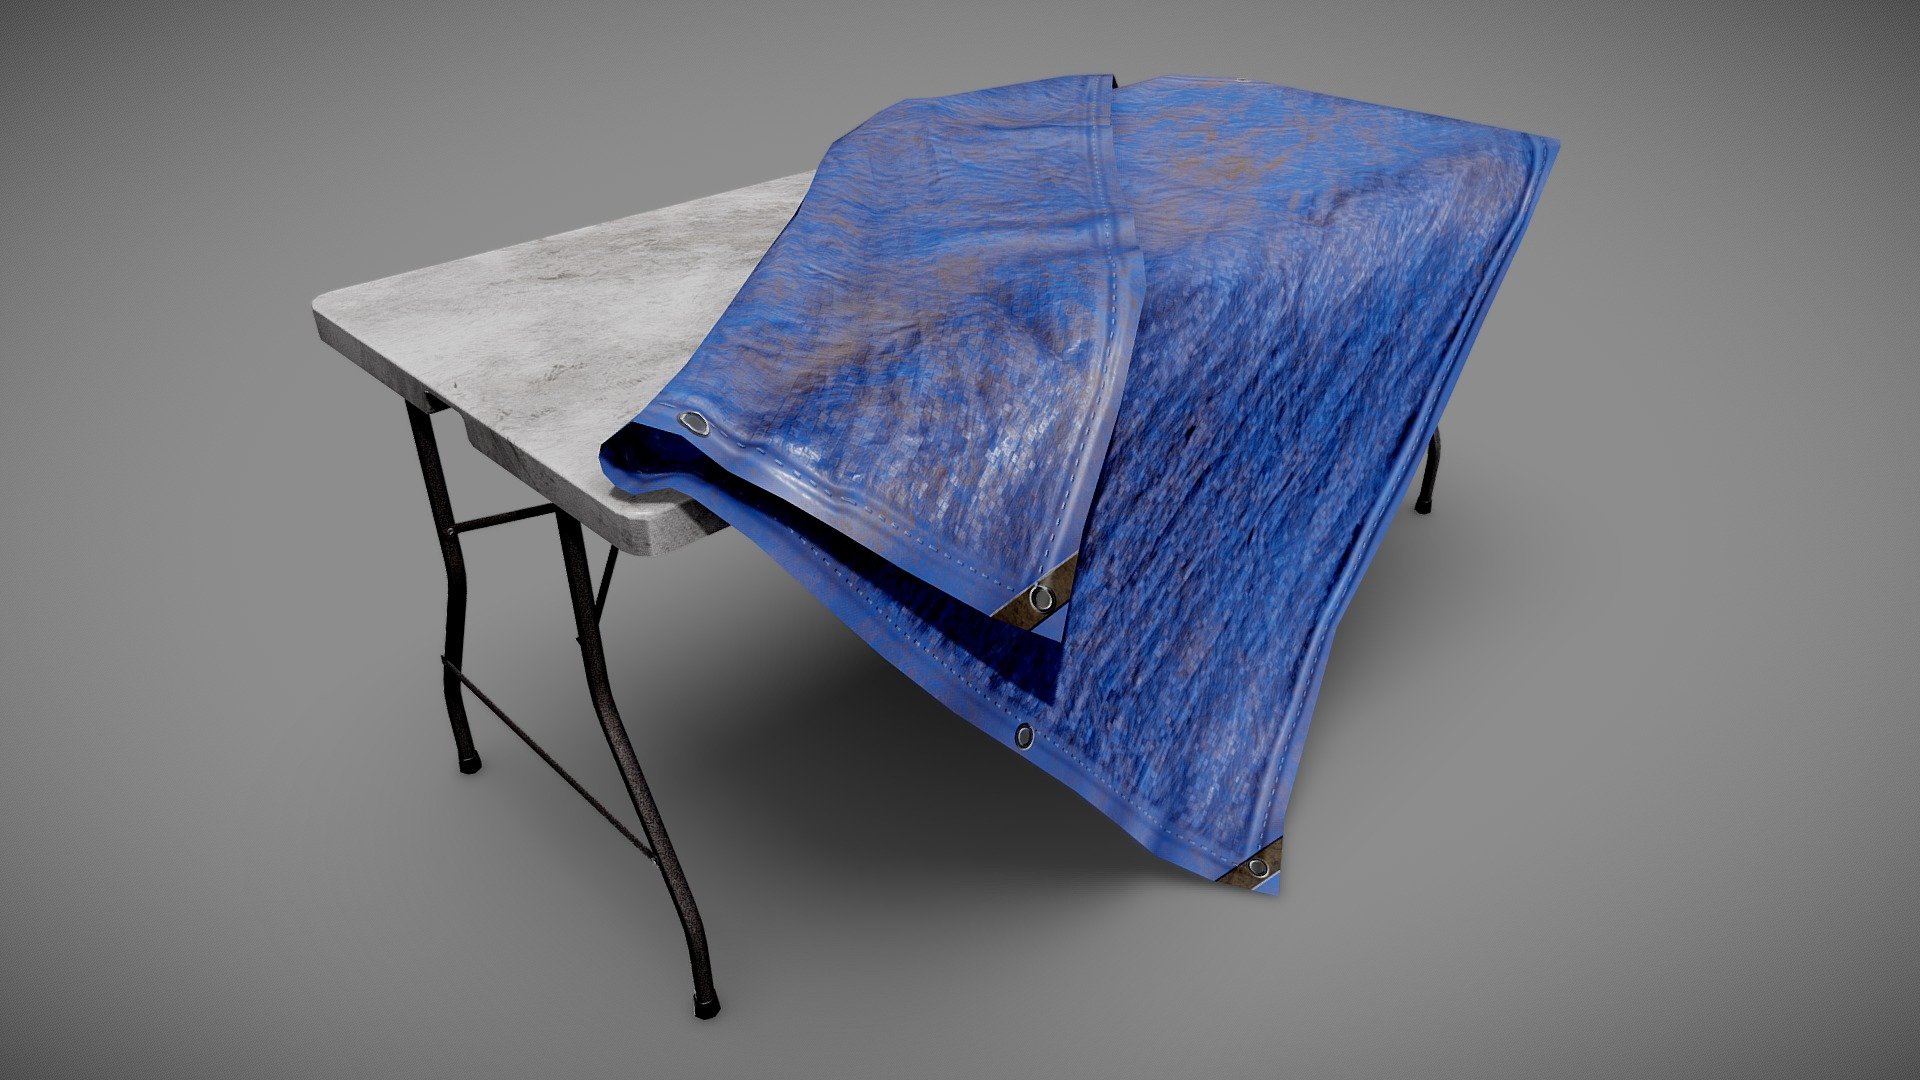 Free to everyone to use for anything. All I ask is that you consider me for your 3D projects! You can contact me at OliverTriplett3D@gmail.com - Foldable Table - Download Free 3D model by Oliver Triplett (@OliverTriplett) 3d model